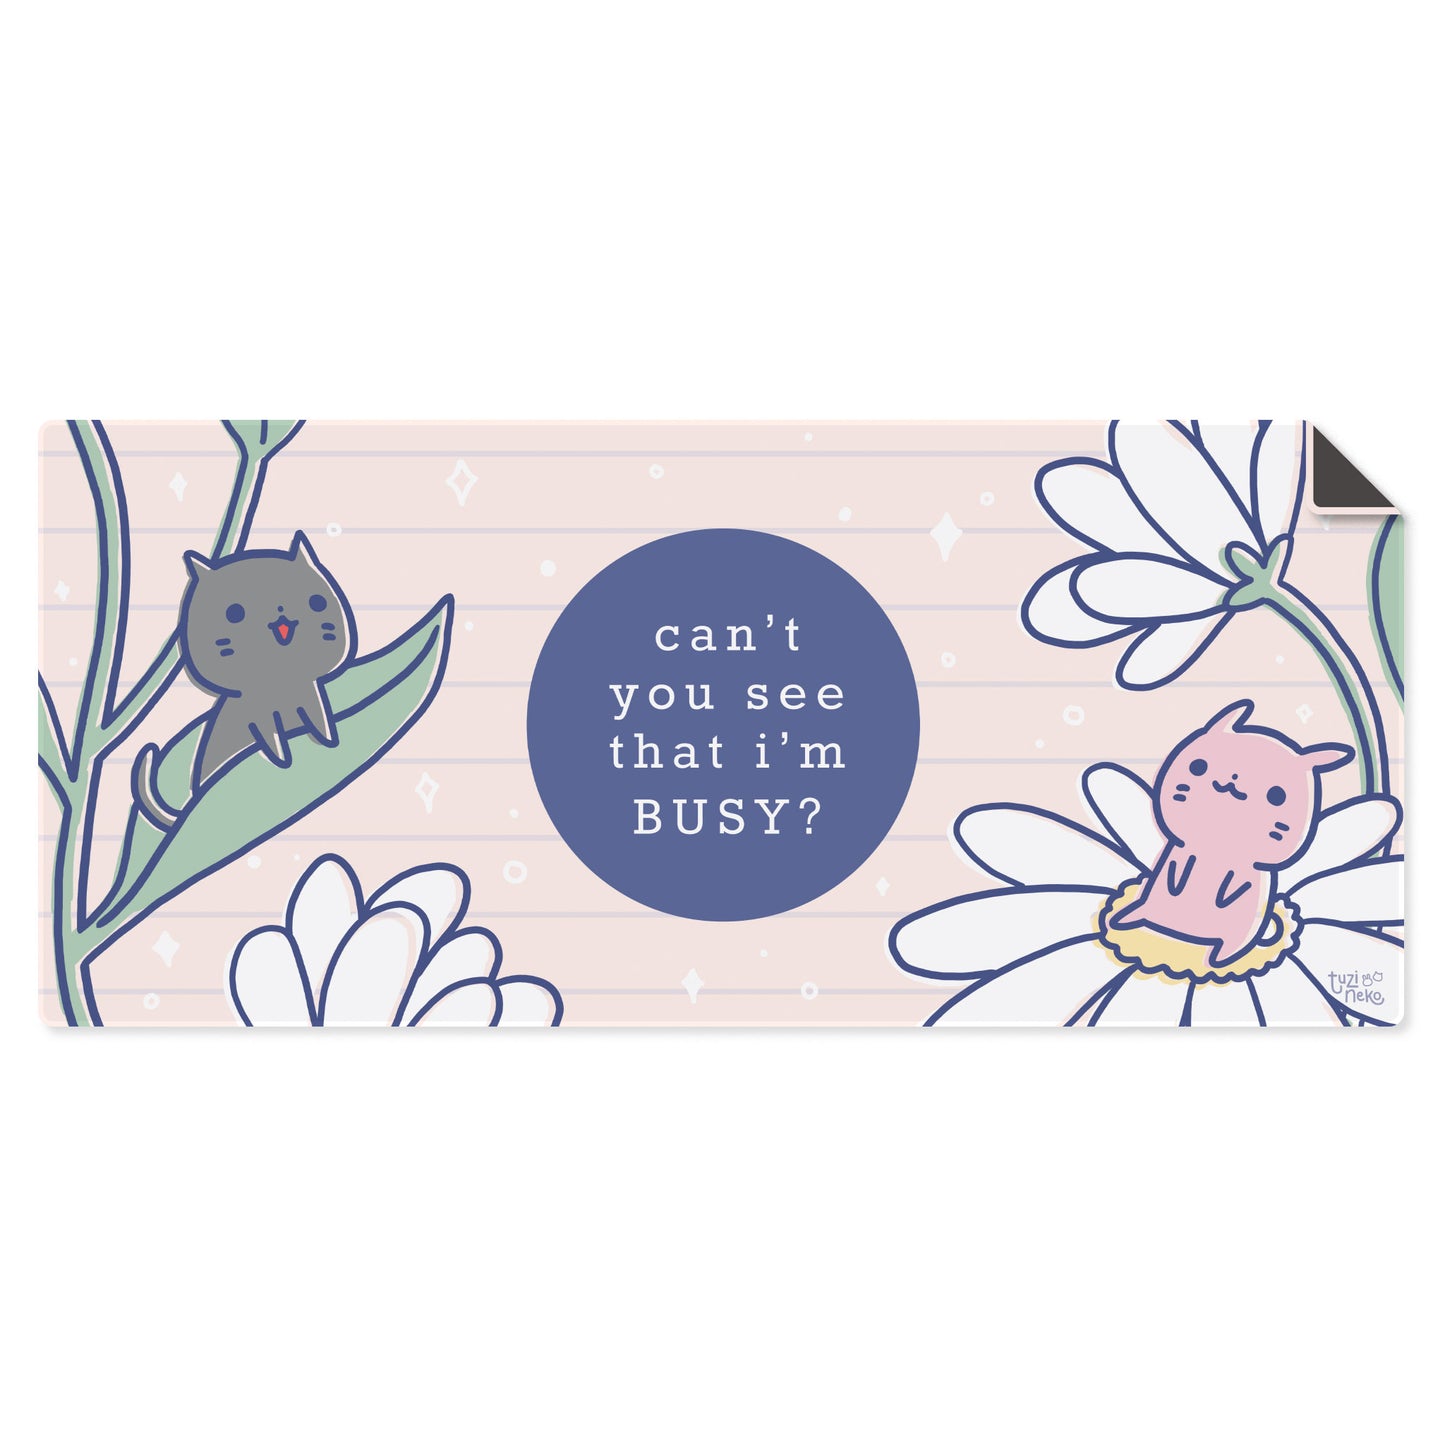 Tuzi And Neko "Can't You See That I'm Busy" Floral Desk Mat